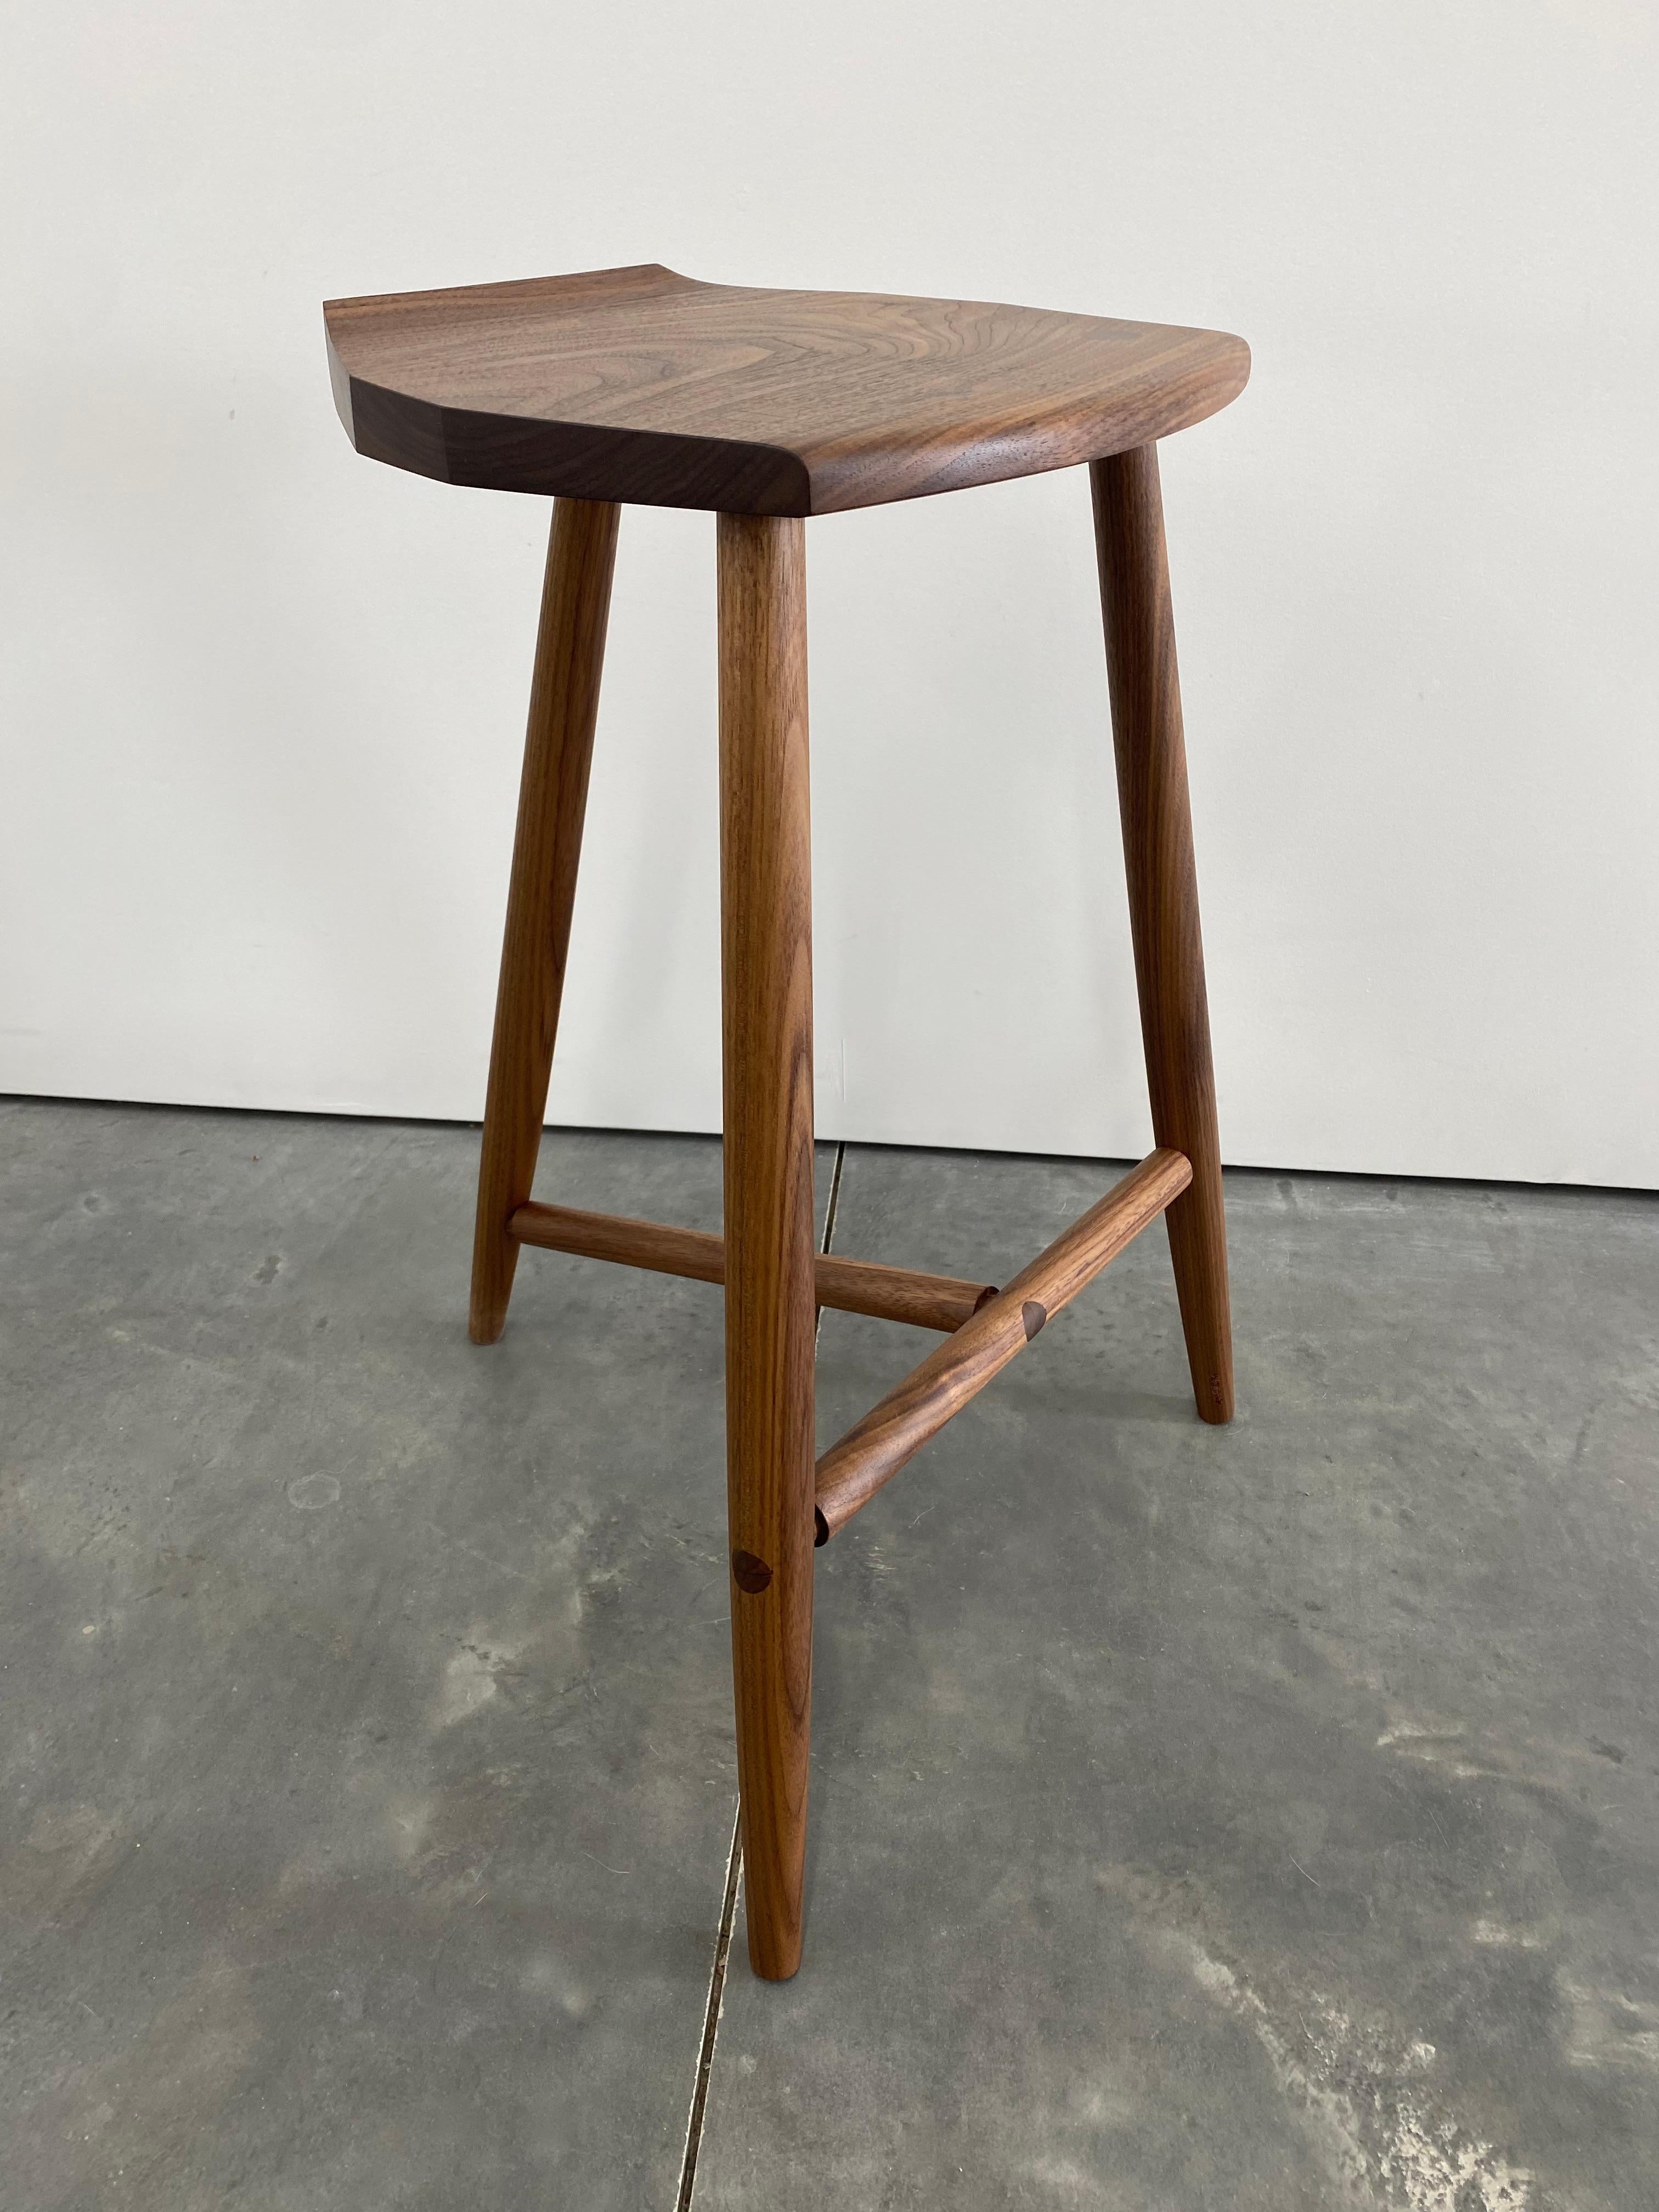 New York Heartwoods' walnut solid wood counter-height Jordan Stool is influenced by Shaker and Mid-Century design; created to be comfortable, light and easy to move; and features three turned legs, a unique hand-carved faceted seat, and wedged